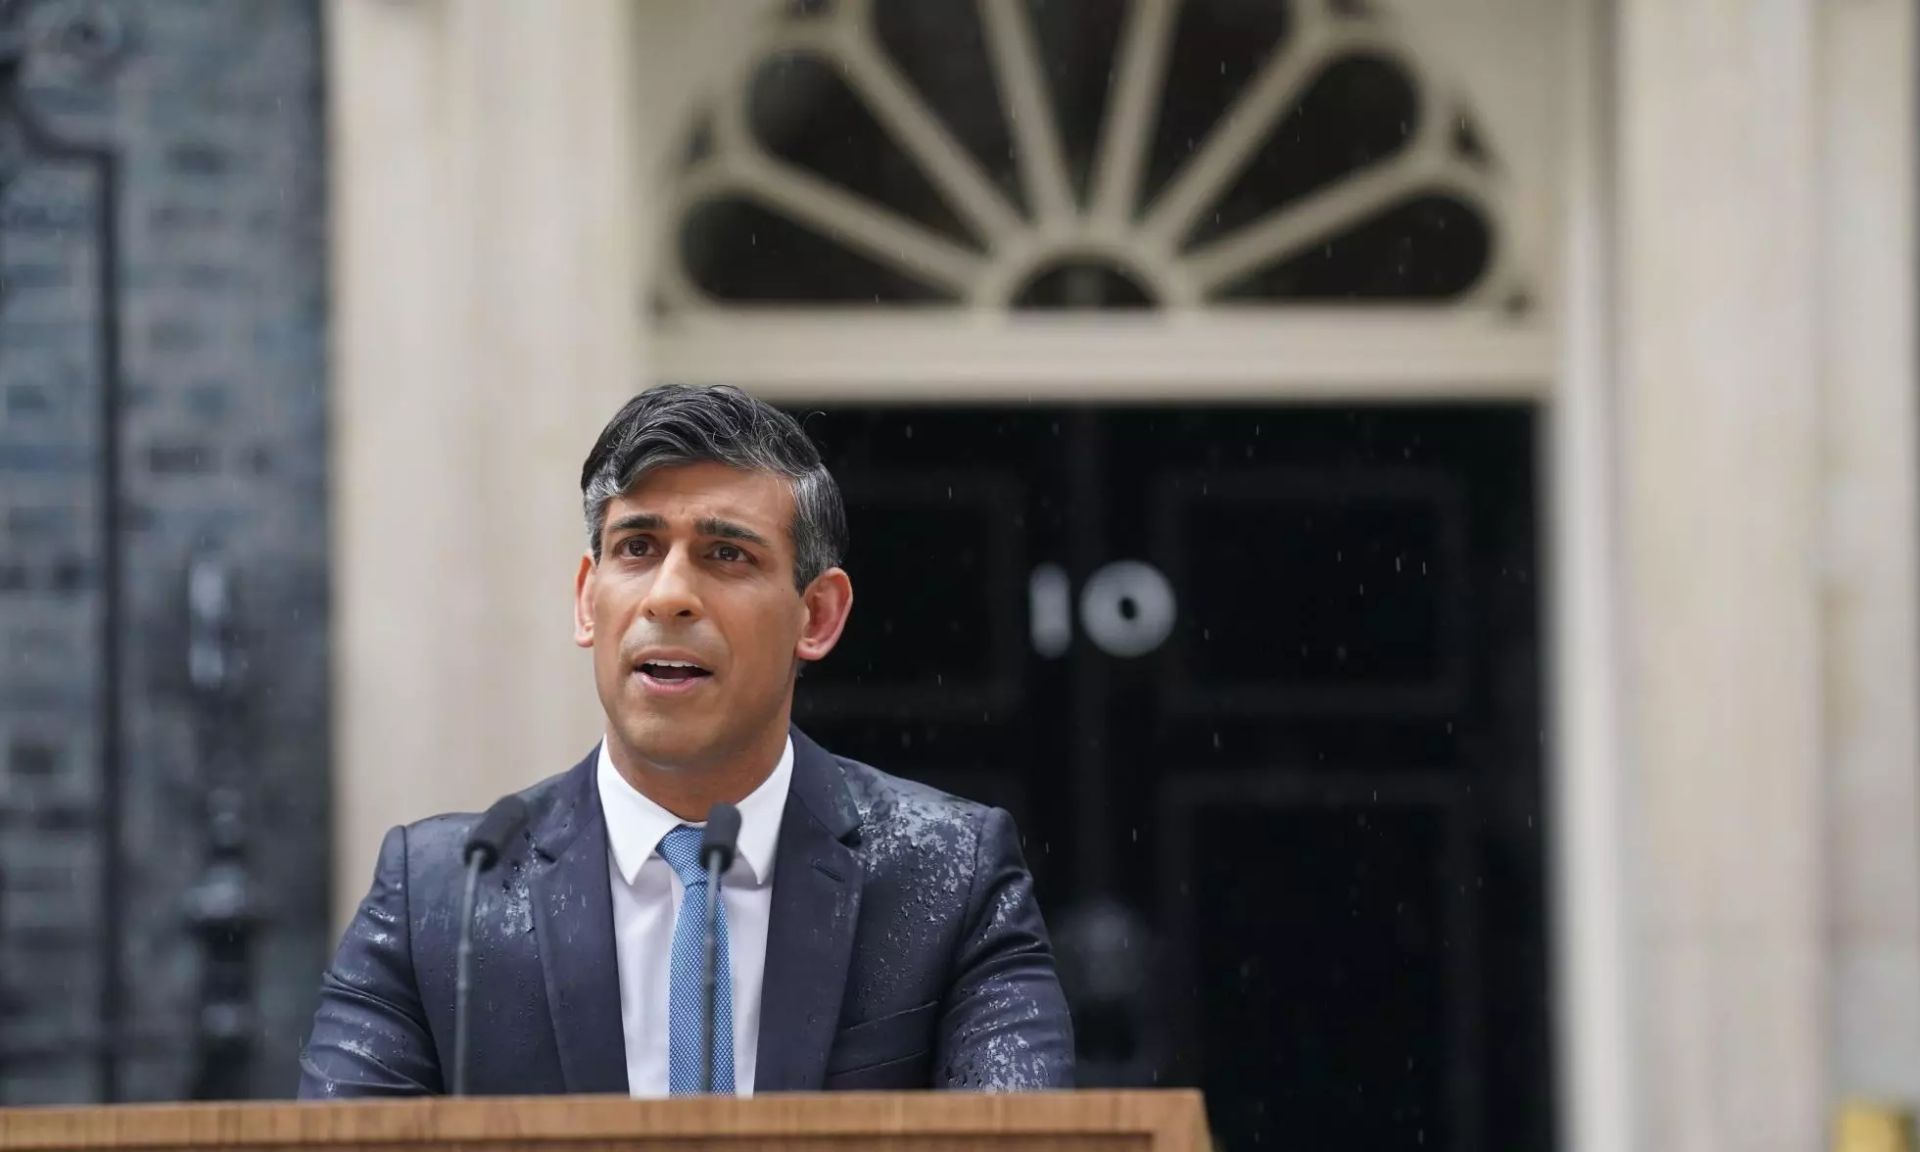 Rishi Sunak braves the Downing Street rain to announce the date of the next general election to the public.